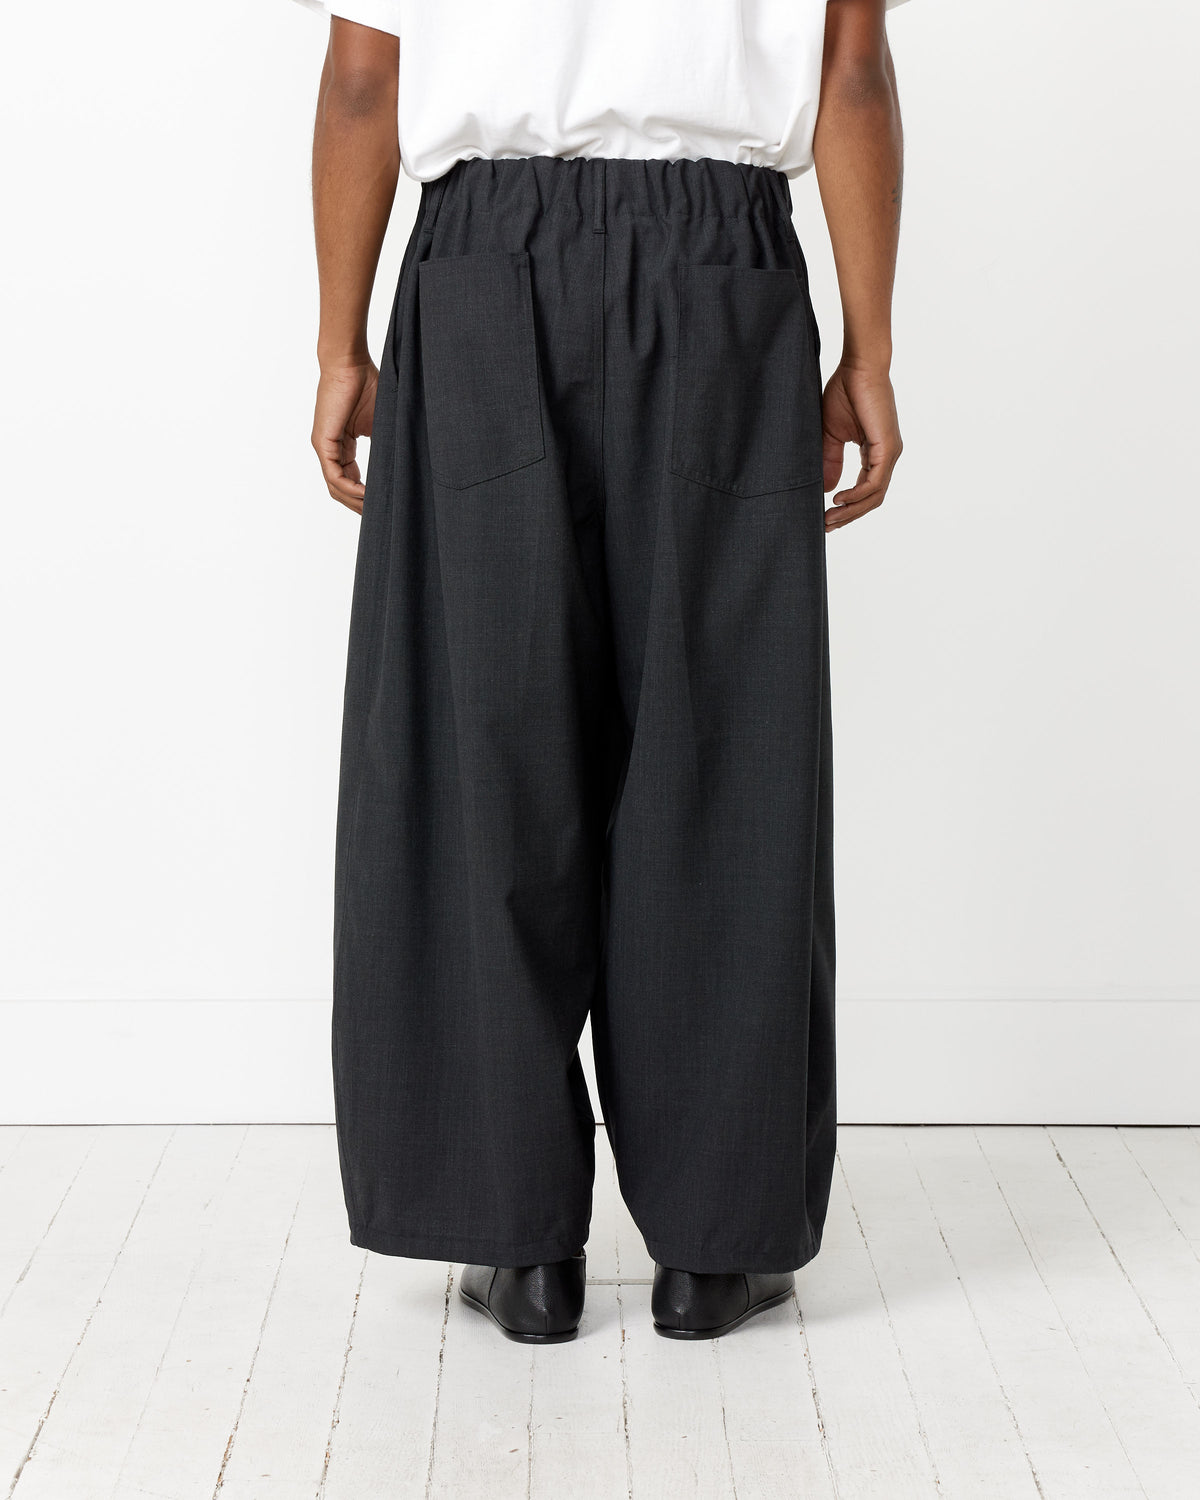 Essential Circular Pant in Anthracite Sillage A wide range of